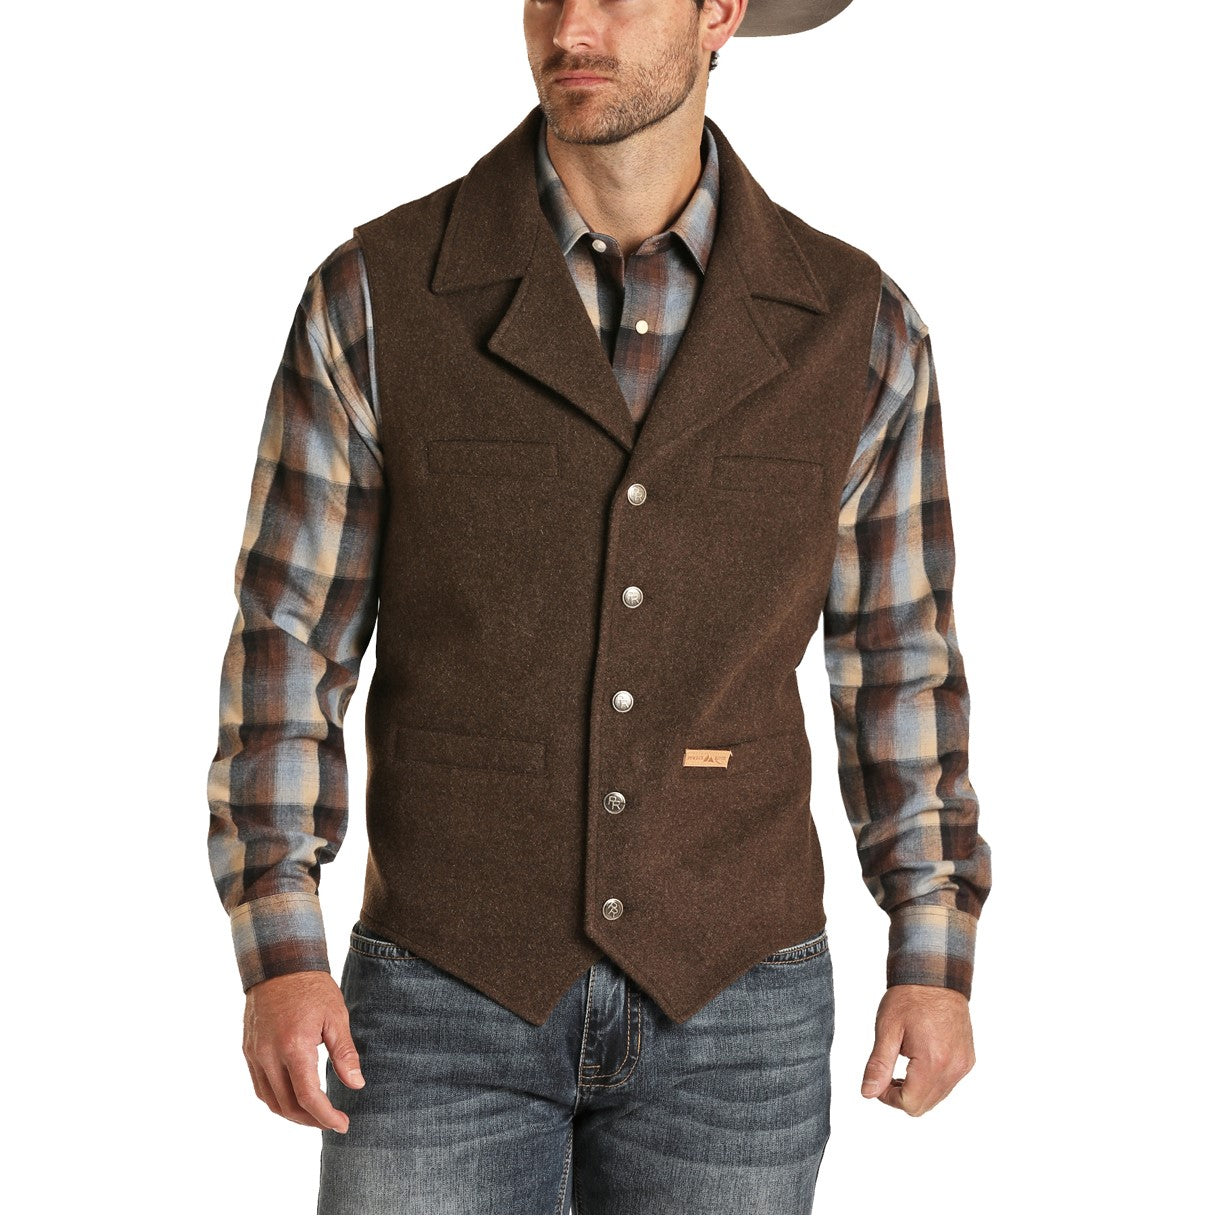 Powder River Outfitters Men's Wool Brown Heather Vest 98-1176-22